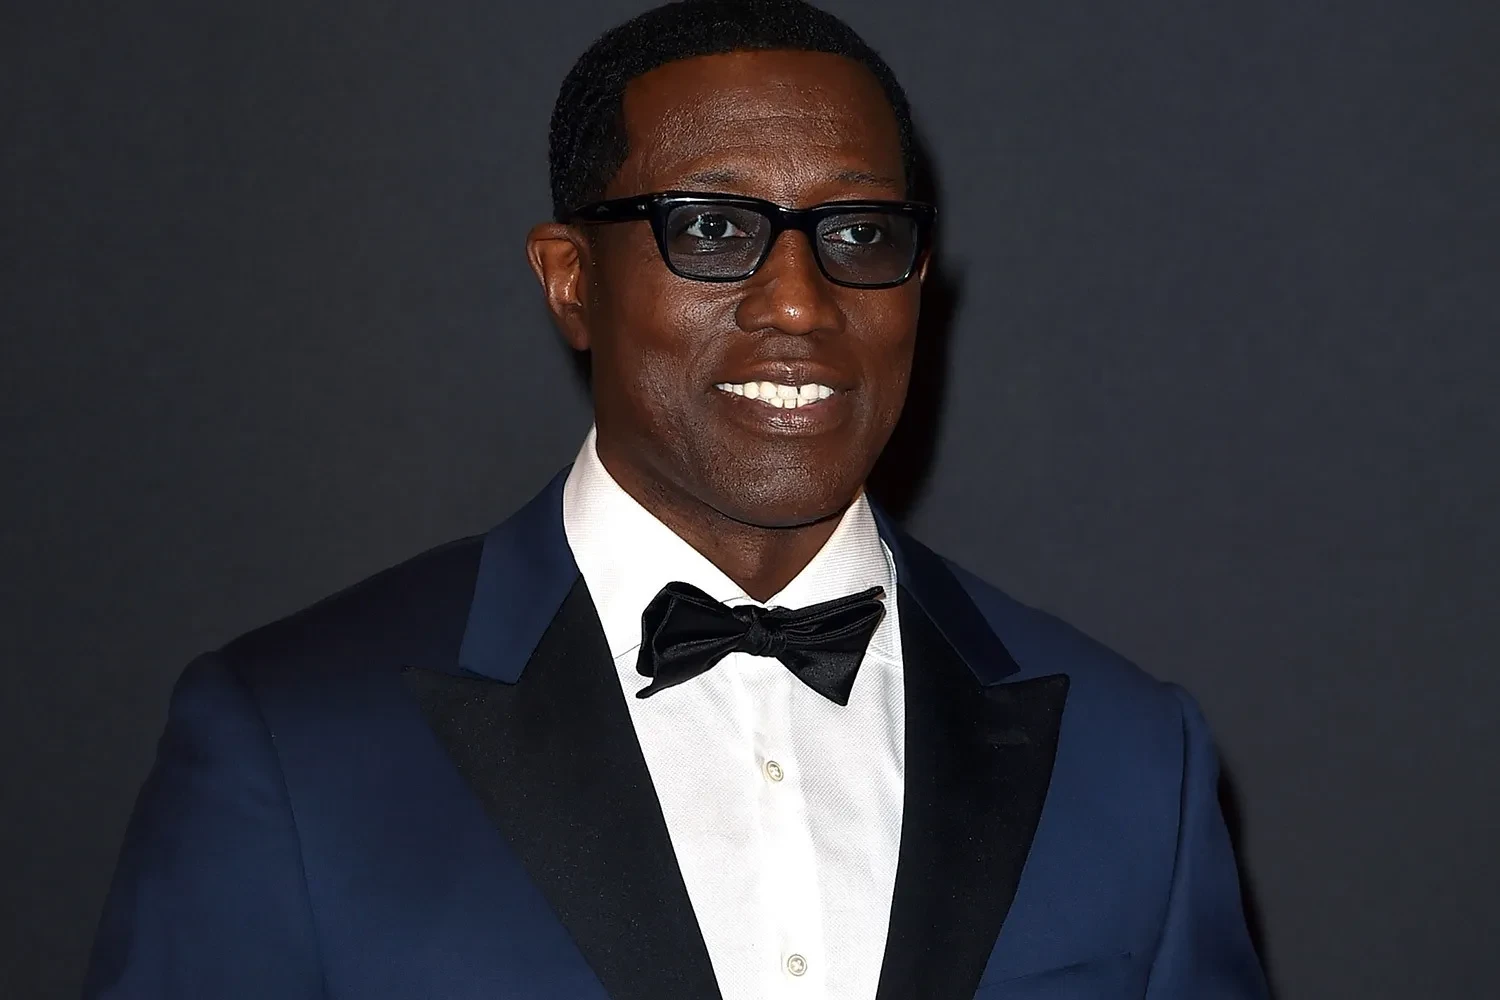 Wesley Snipes tried to woo Tyson's girlfriend